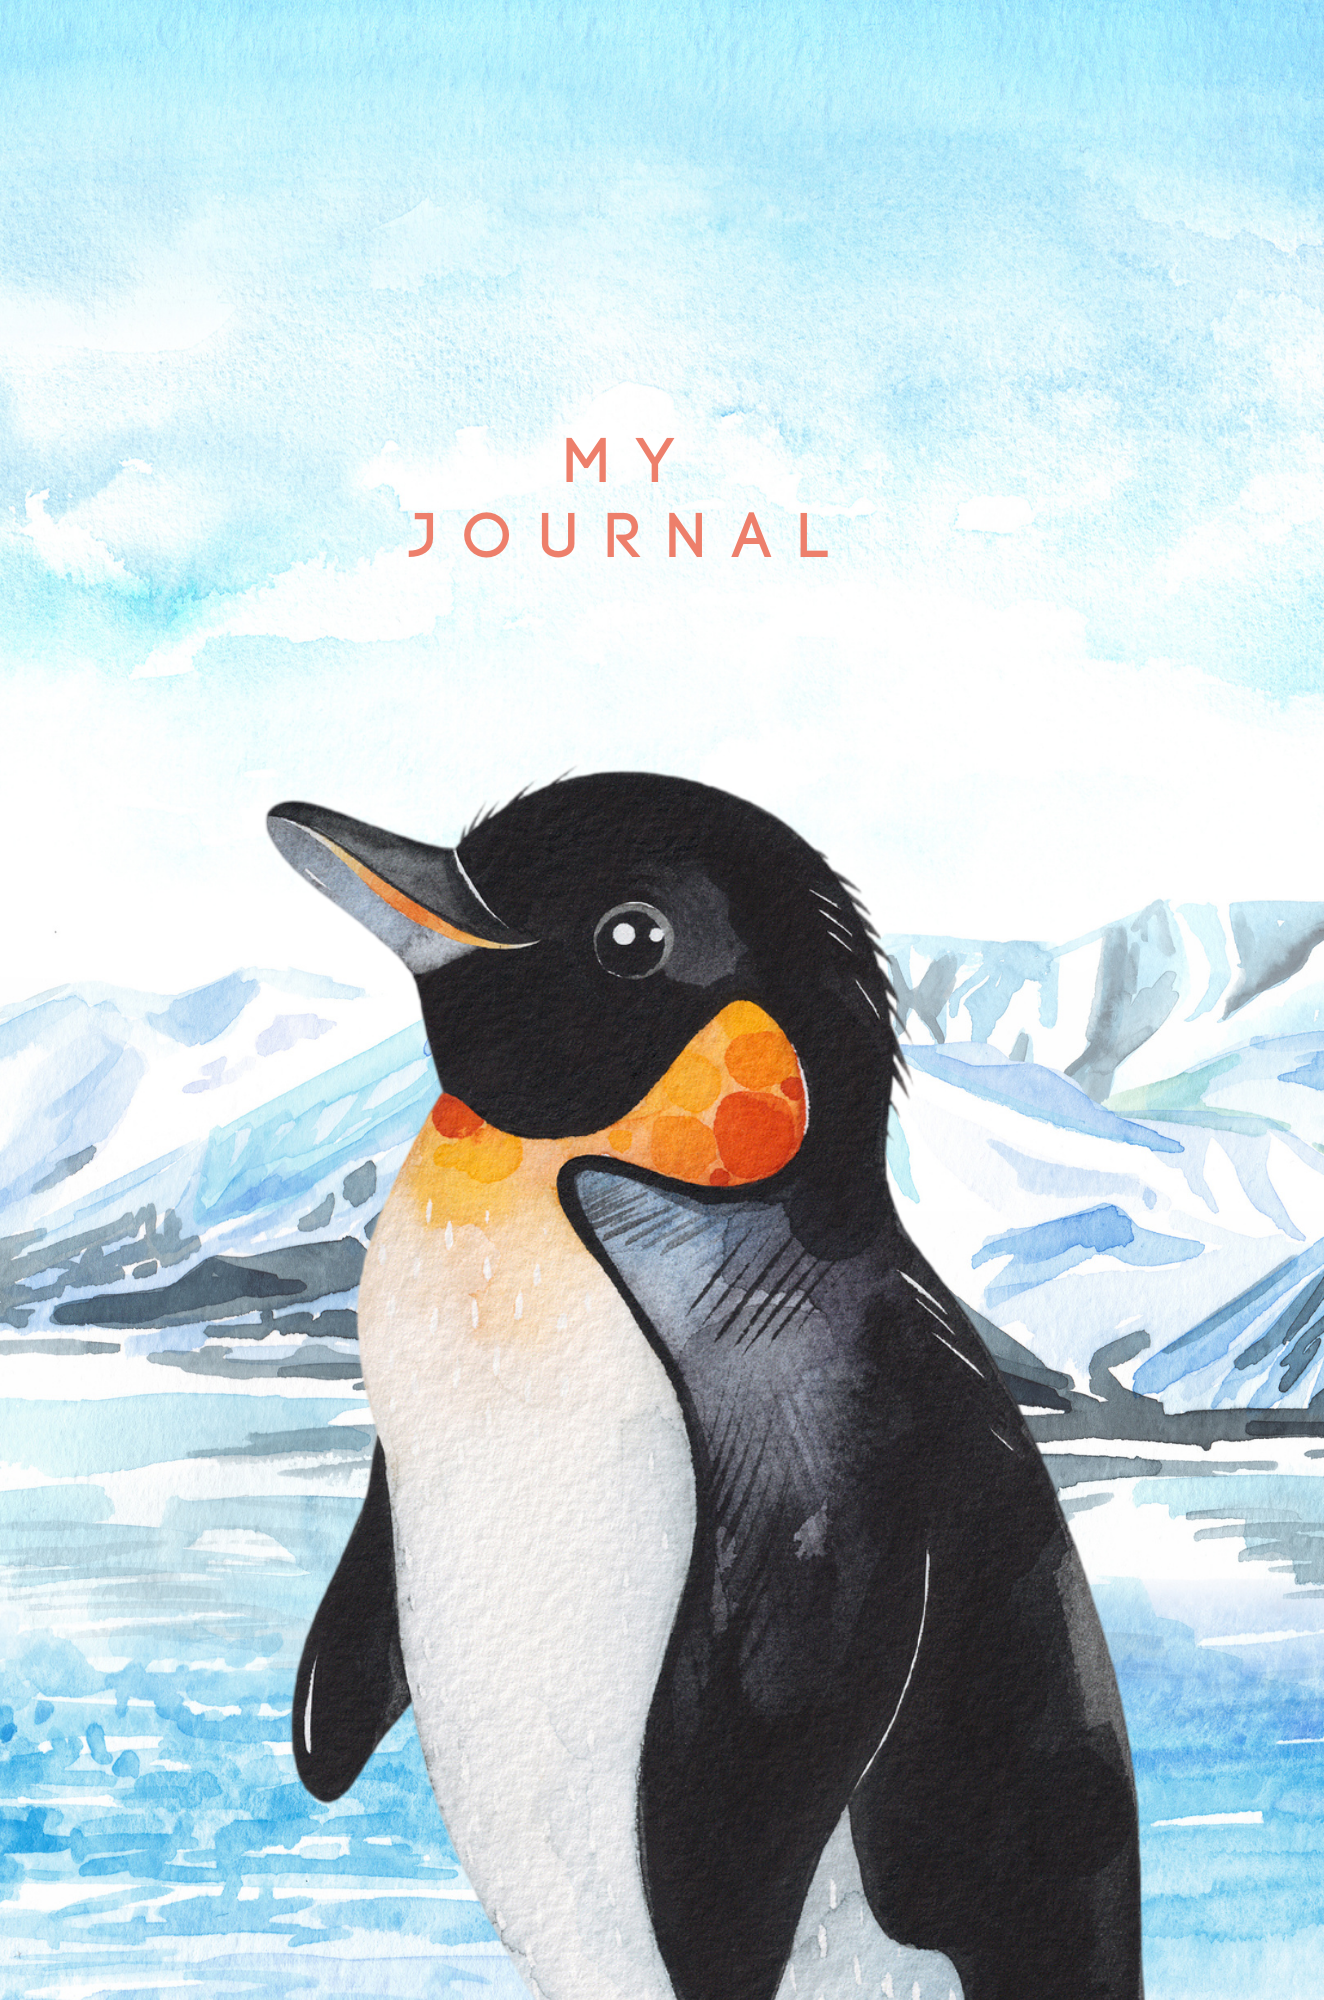 Kids Journal - Creative Journal, Diary, Notebook for Kids to Capture Their Thoughts